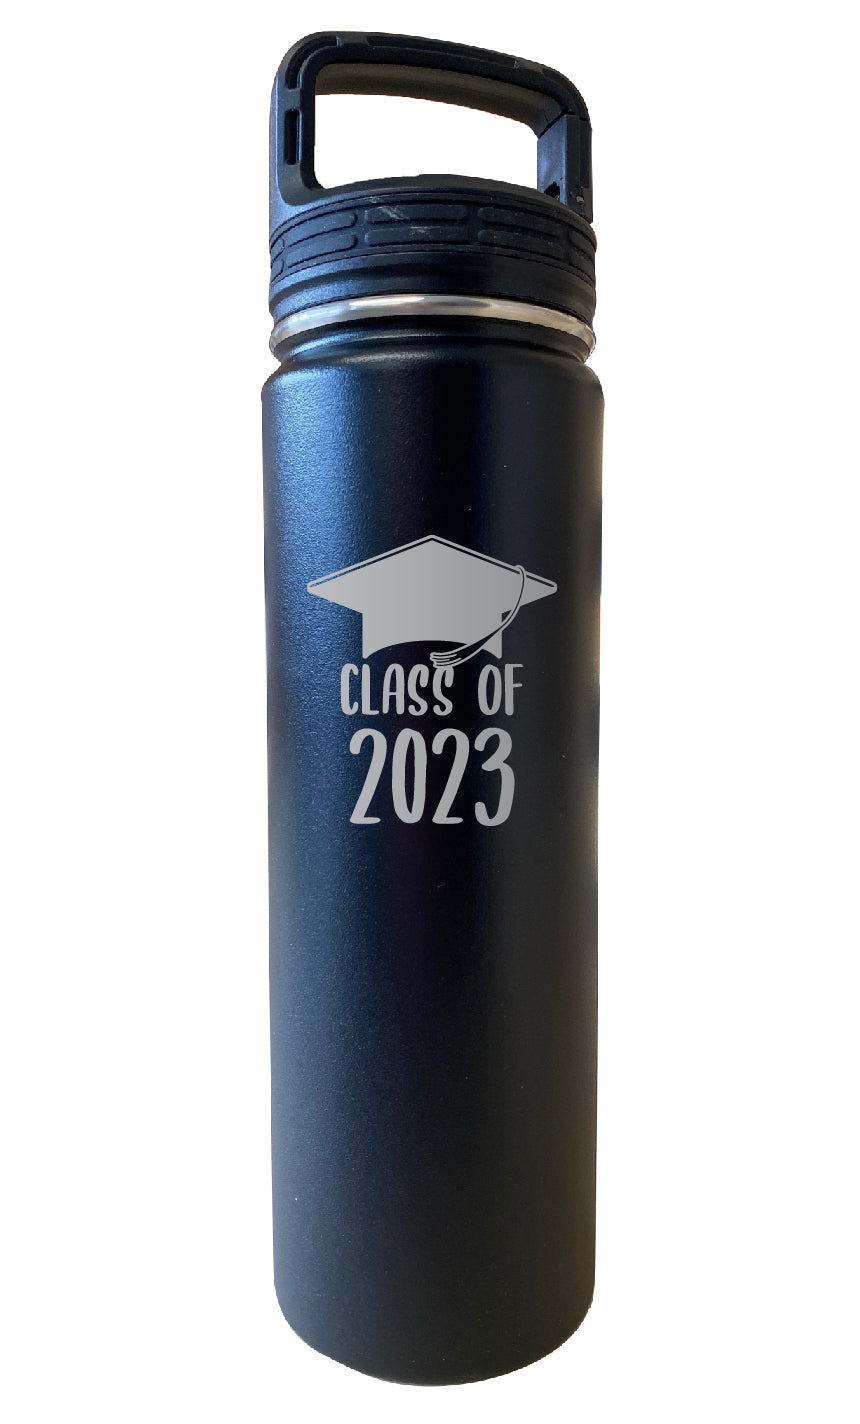 Class of 2023 Graduation Senior 32 oz Insulated Stainless Steel Tumbler